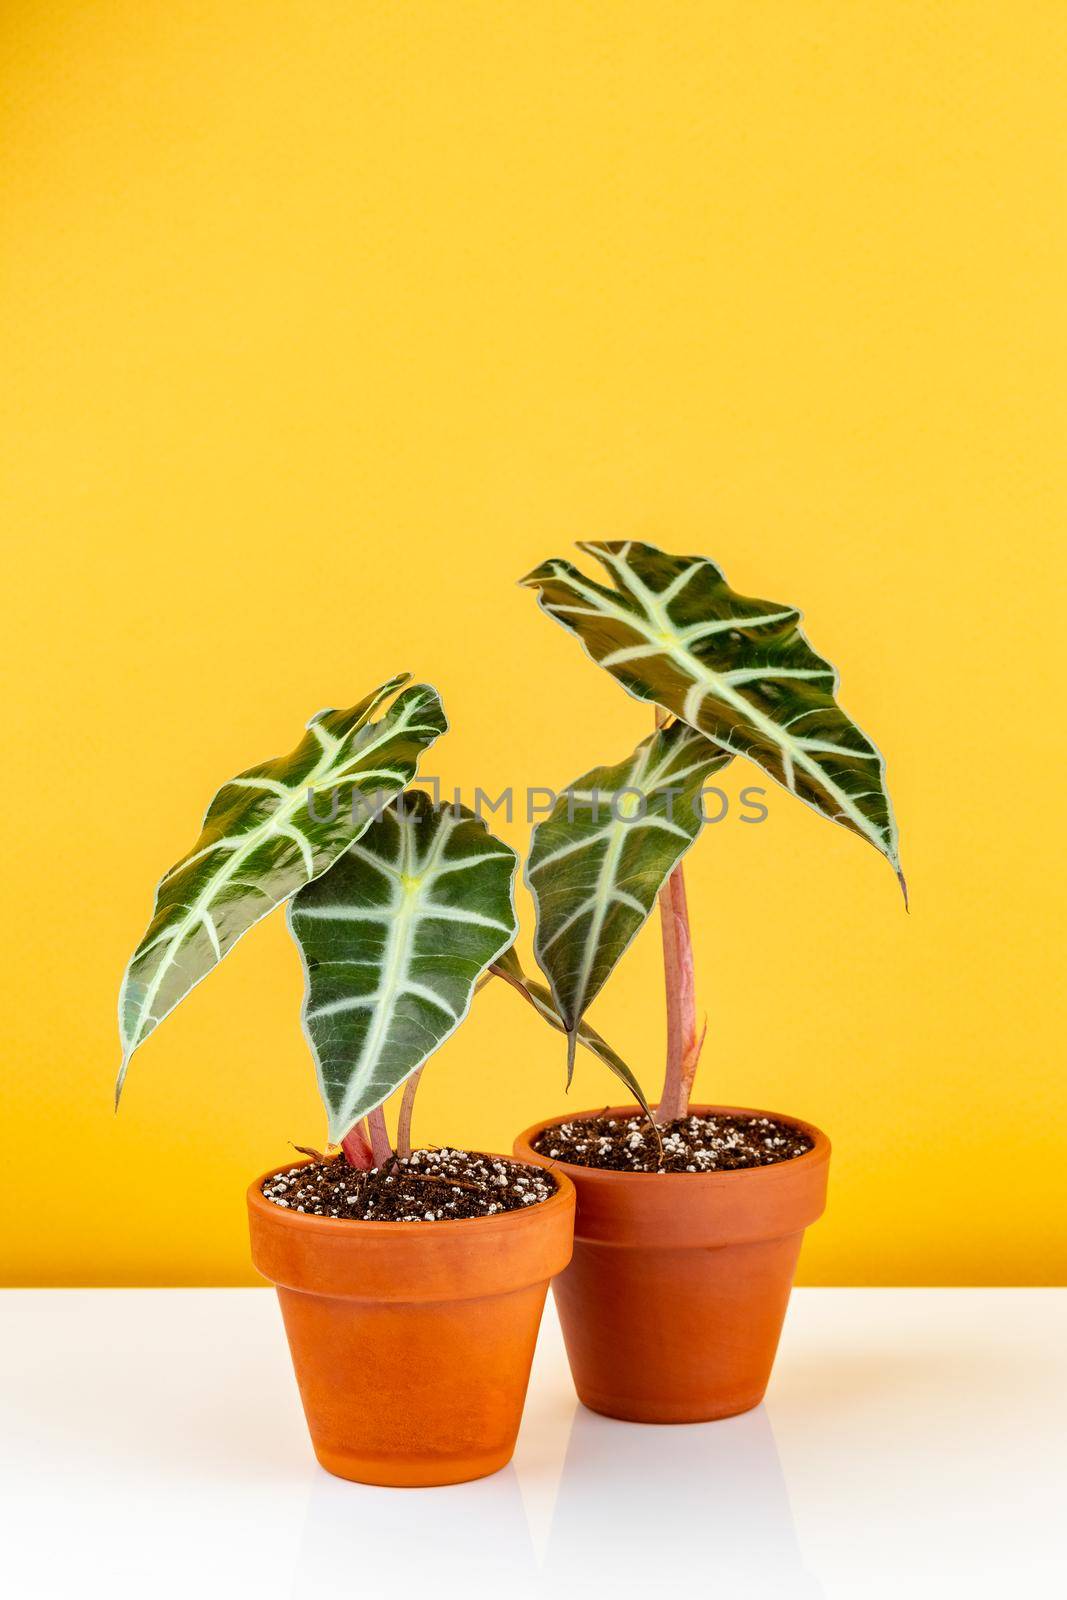 Alocasia Polly or Alocasia Amazonica and African Mask Plant potted in terracota ceramic planters